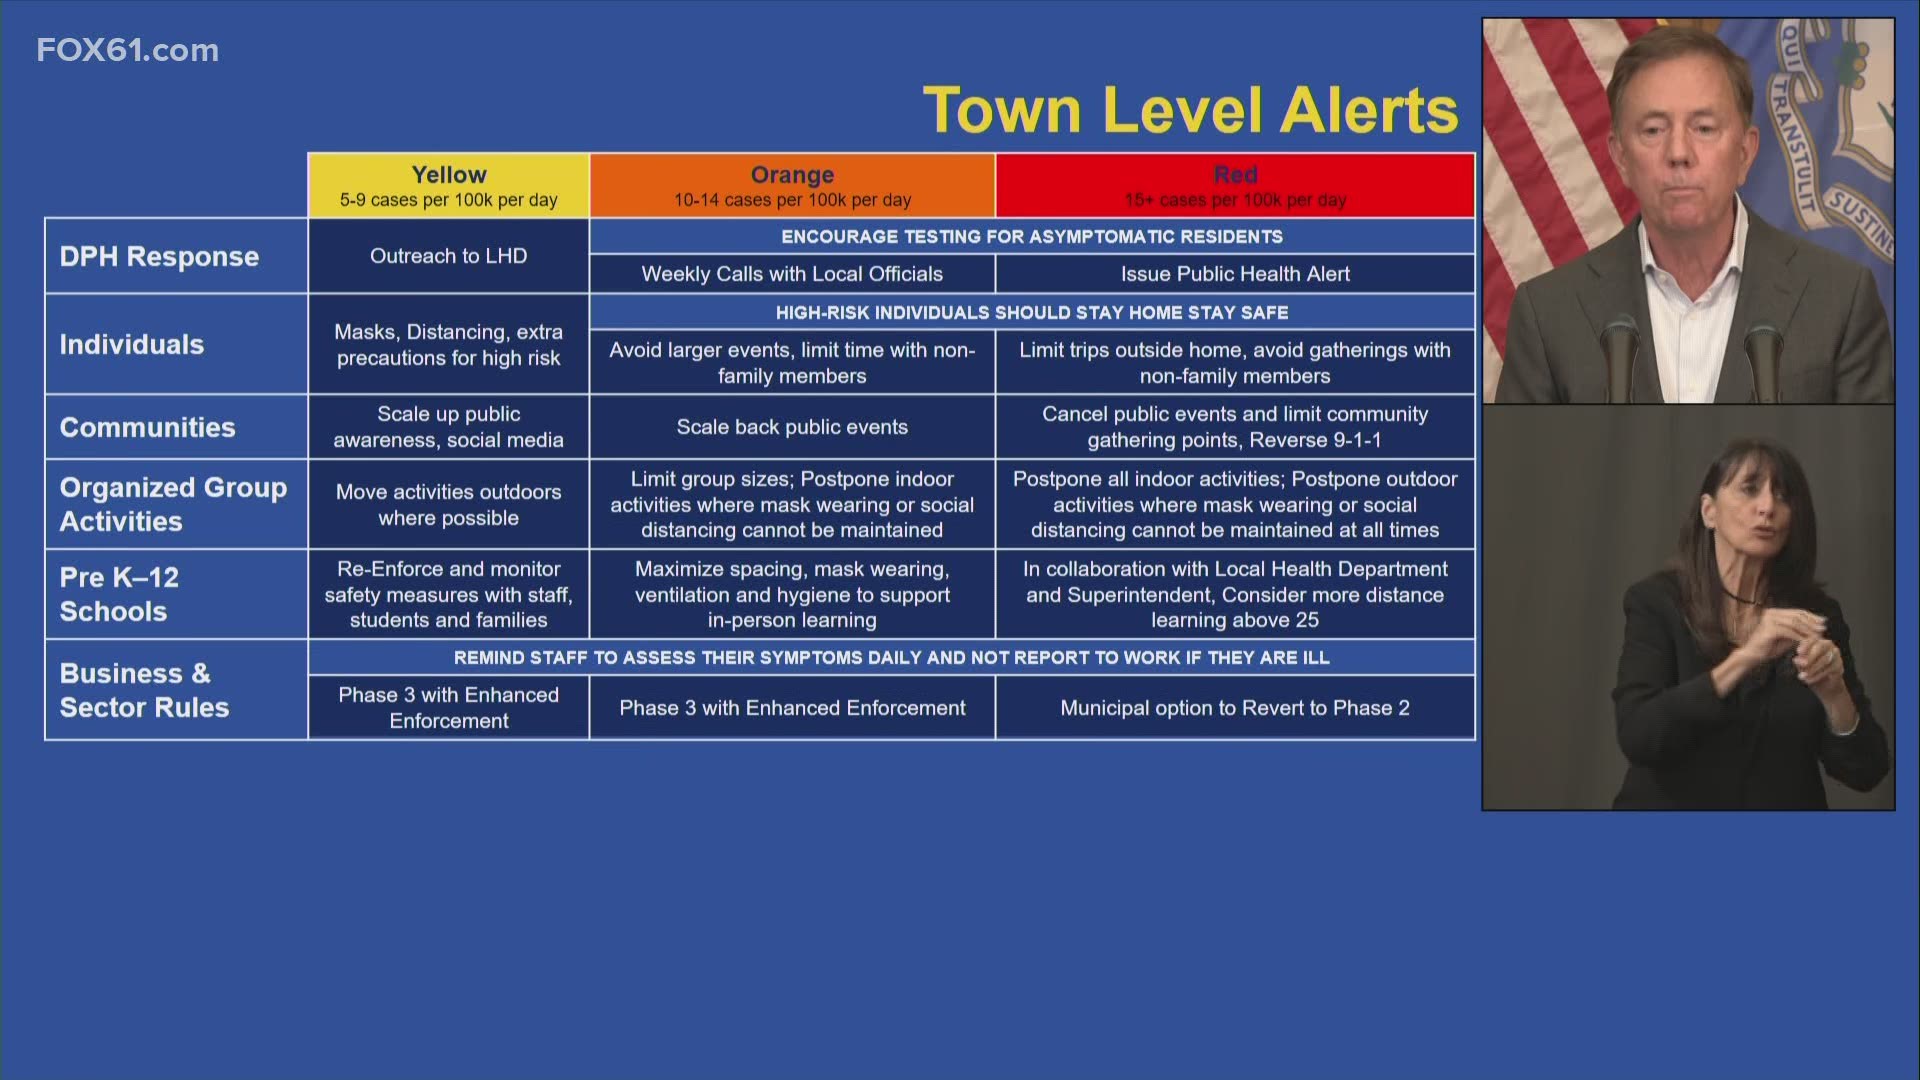 Gov. Lamont unveiled a new tool Thursday the State will be using to help towns mitigate the spread of COVID-19. There are currently 11 towns in Red alert